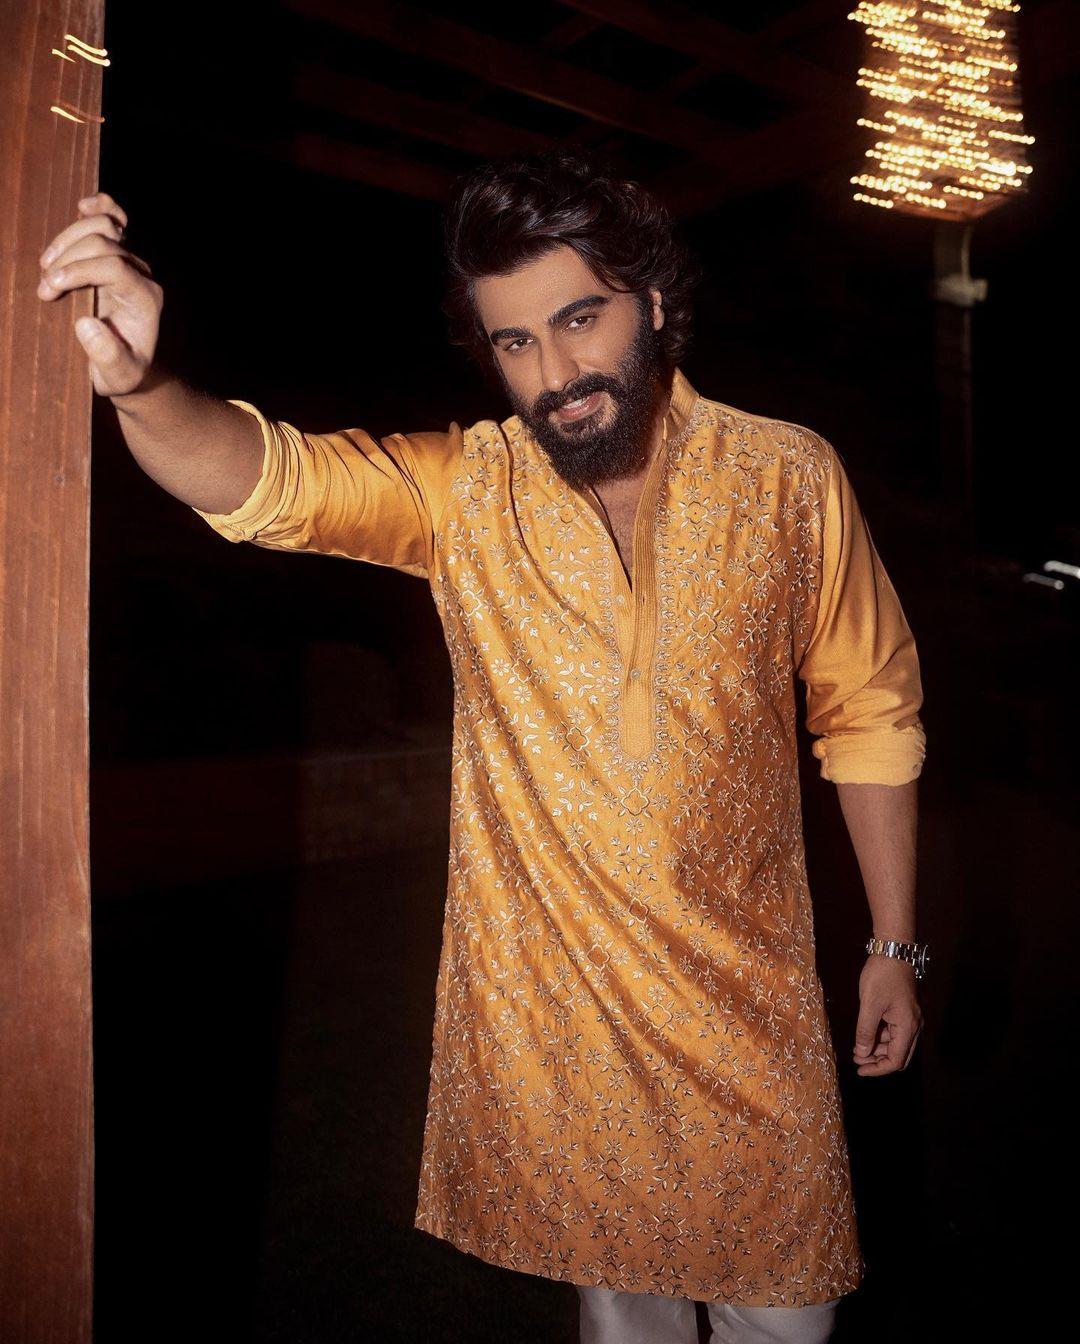 Son of Boney Kapoor and Mona Shourie Kapoor, Arjun Kapoor made his debut with Ishaqzaade in 2012. With roles in 2 States, Ki & Ka, and Panipat, he showcases craft in his acting career. In a relationship with Malaika Arora, Arjun's personal life is often under the spotlight